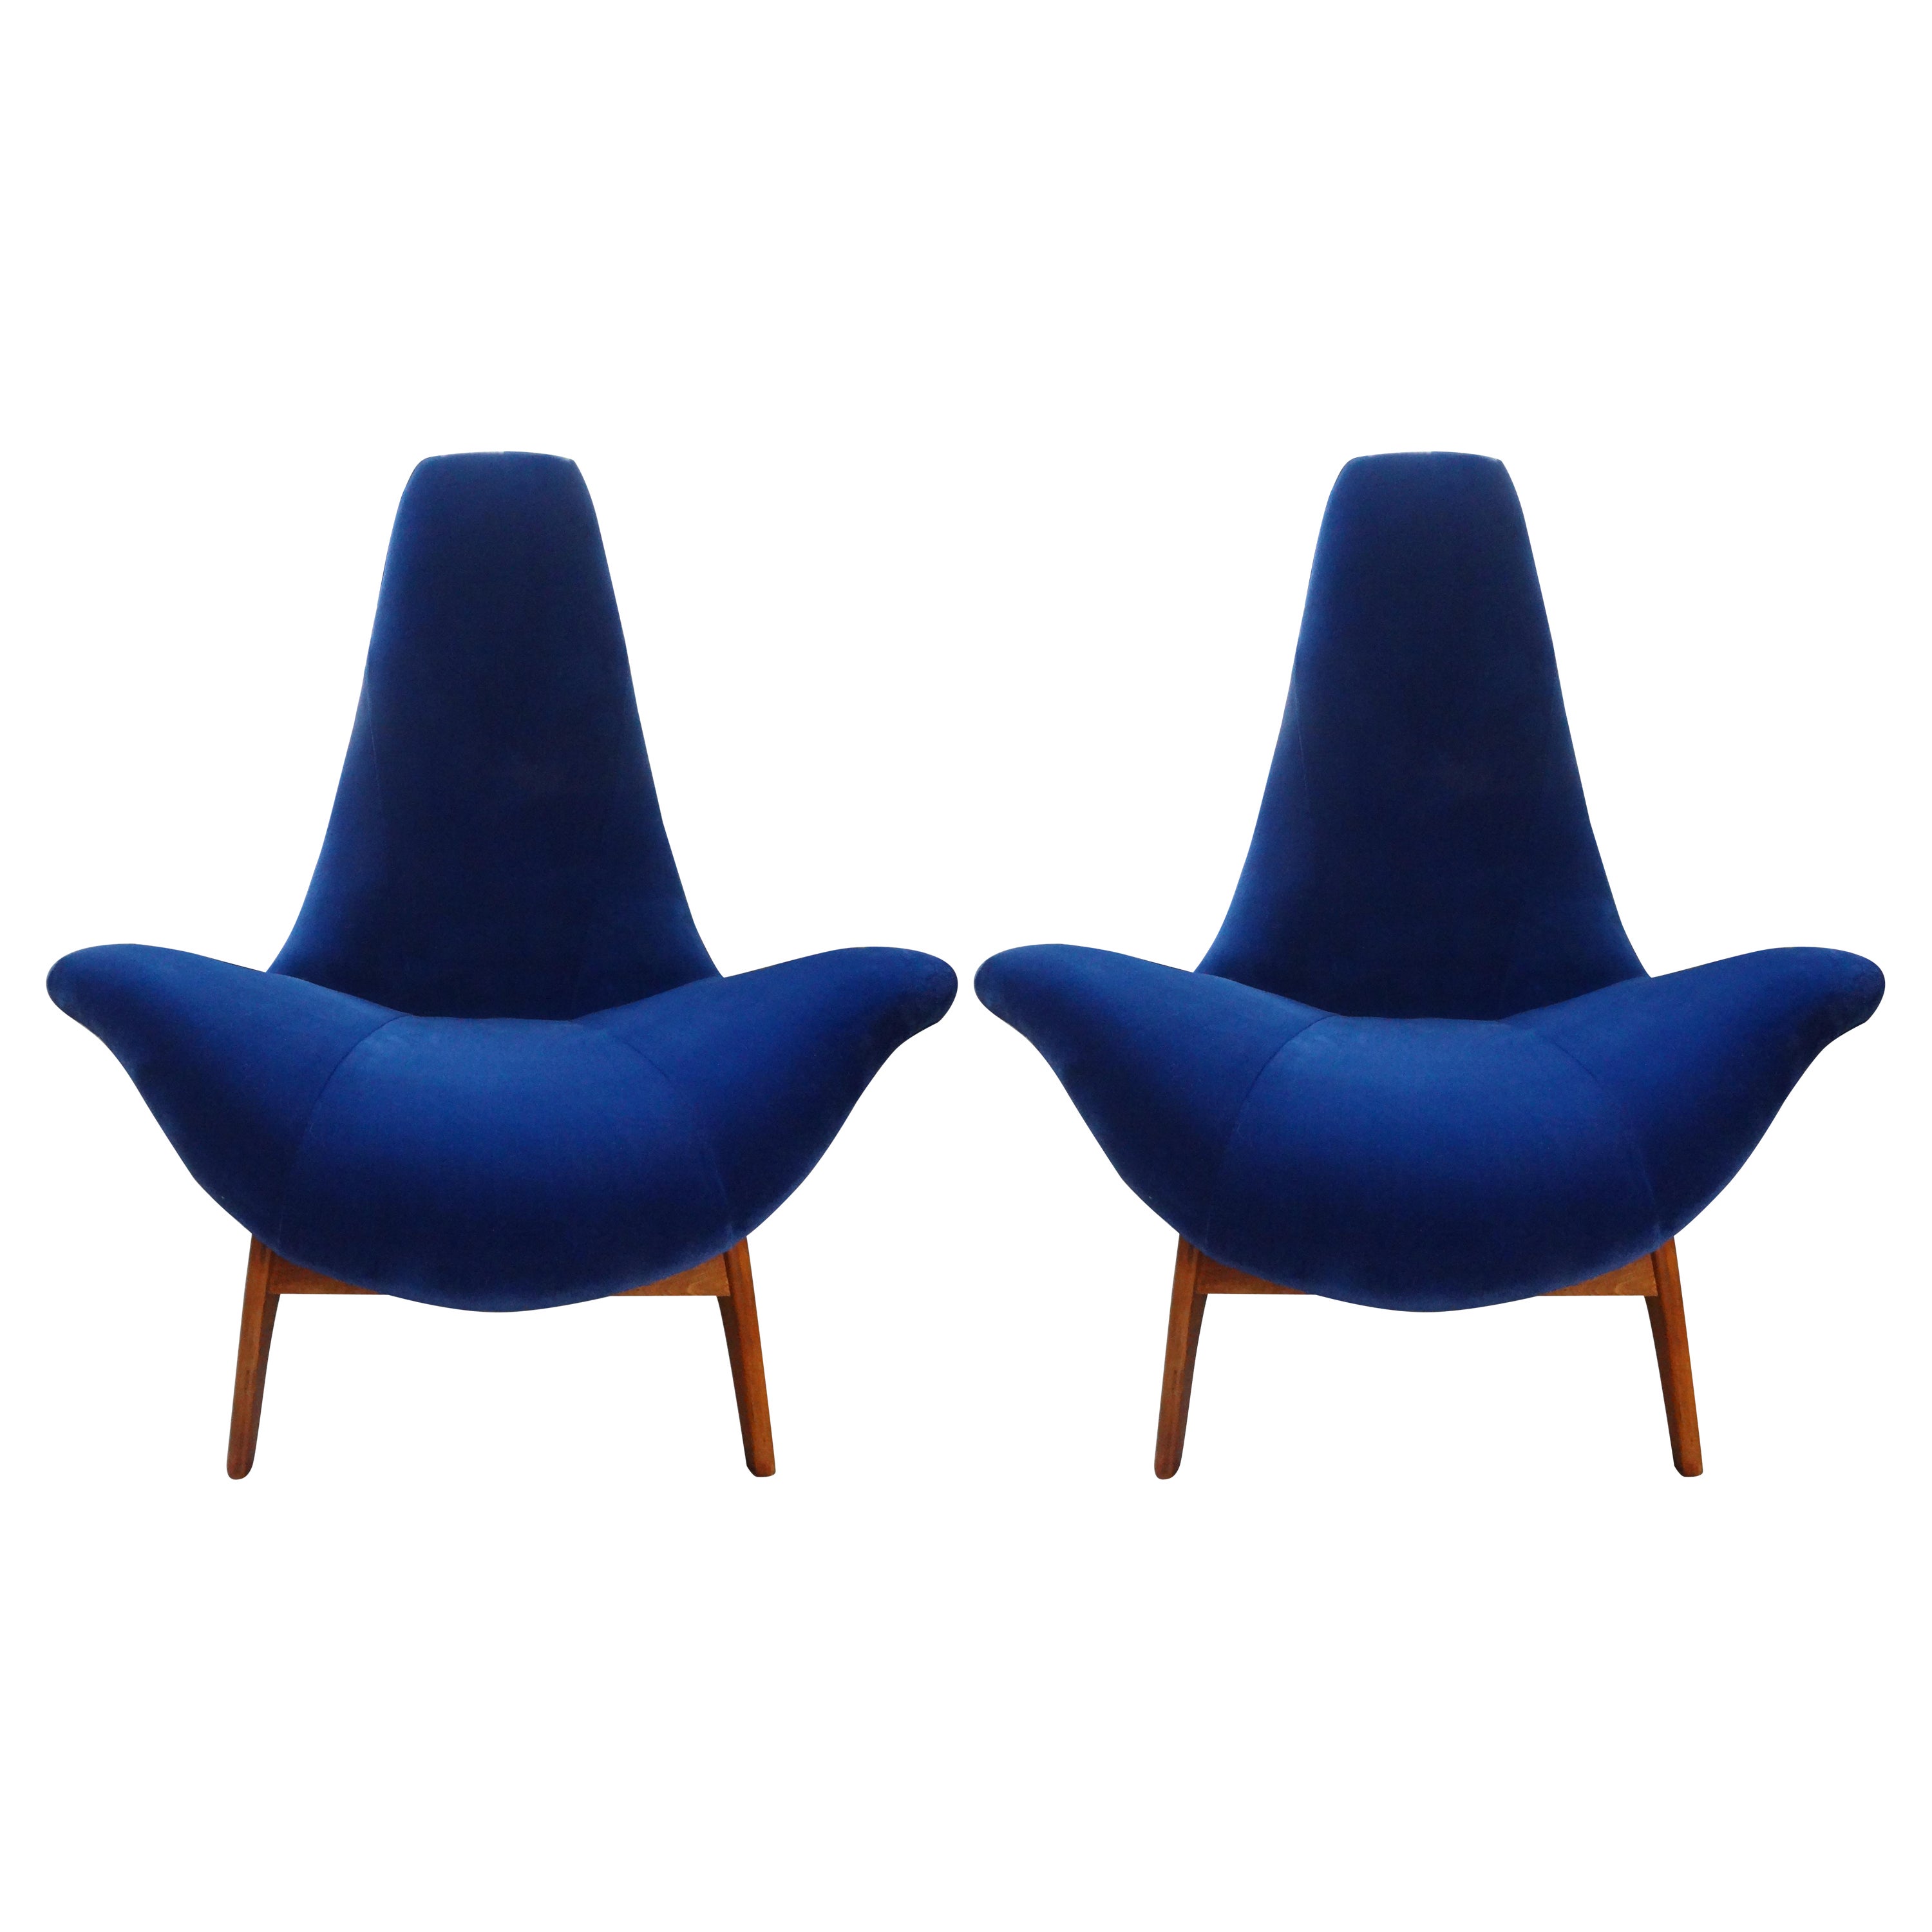 Pair of Adrian Pearsall Gondola Lounge Chairs